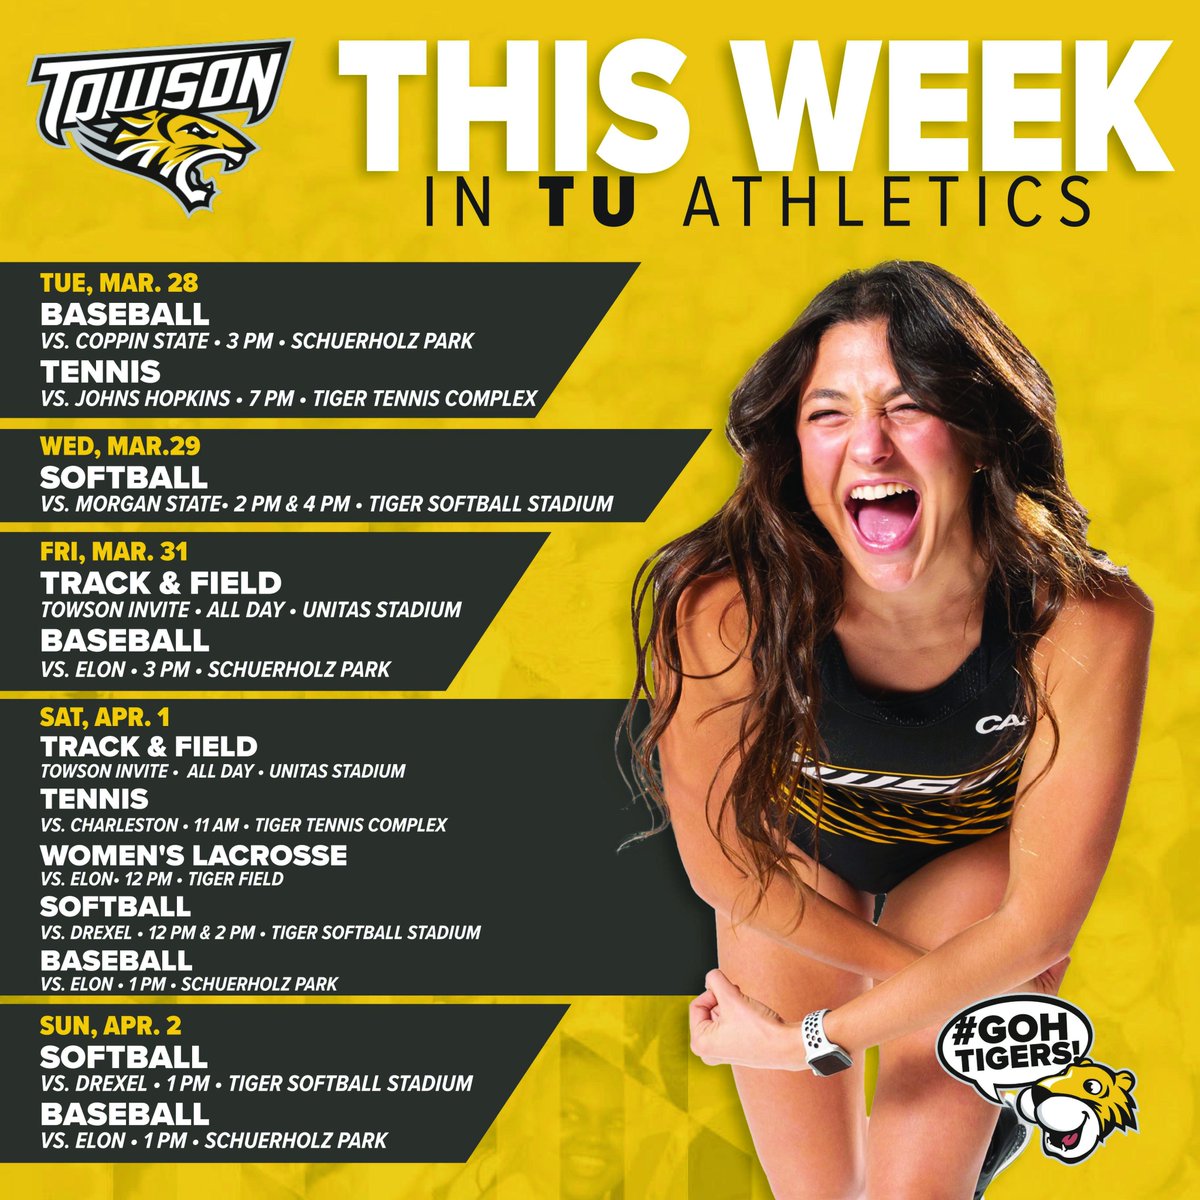 Welcome back students! Lots going on in TU Athletics this week, so come out and support the Tigers! #GohTigers | #UnitedWeRoar